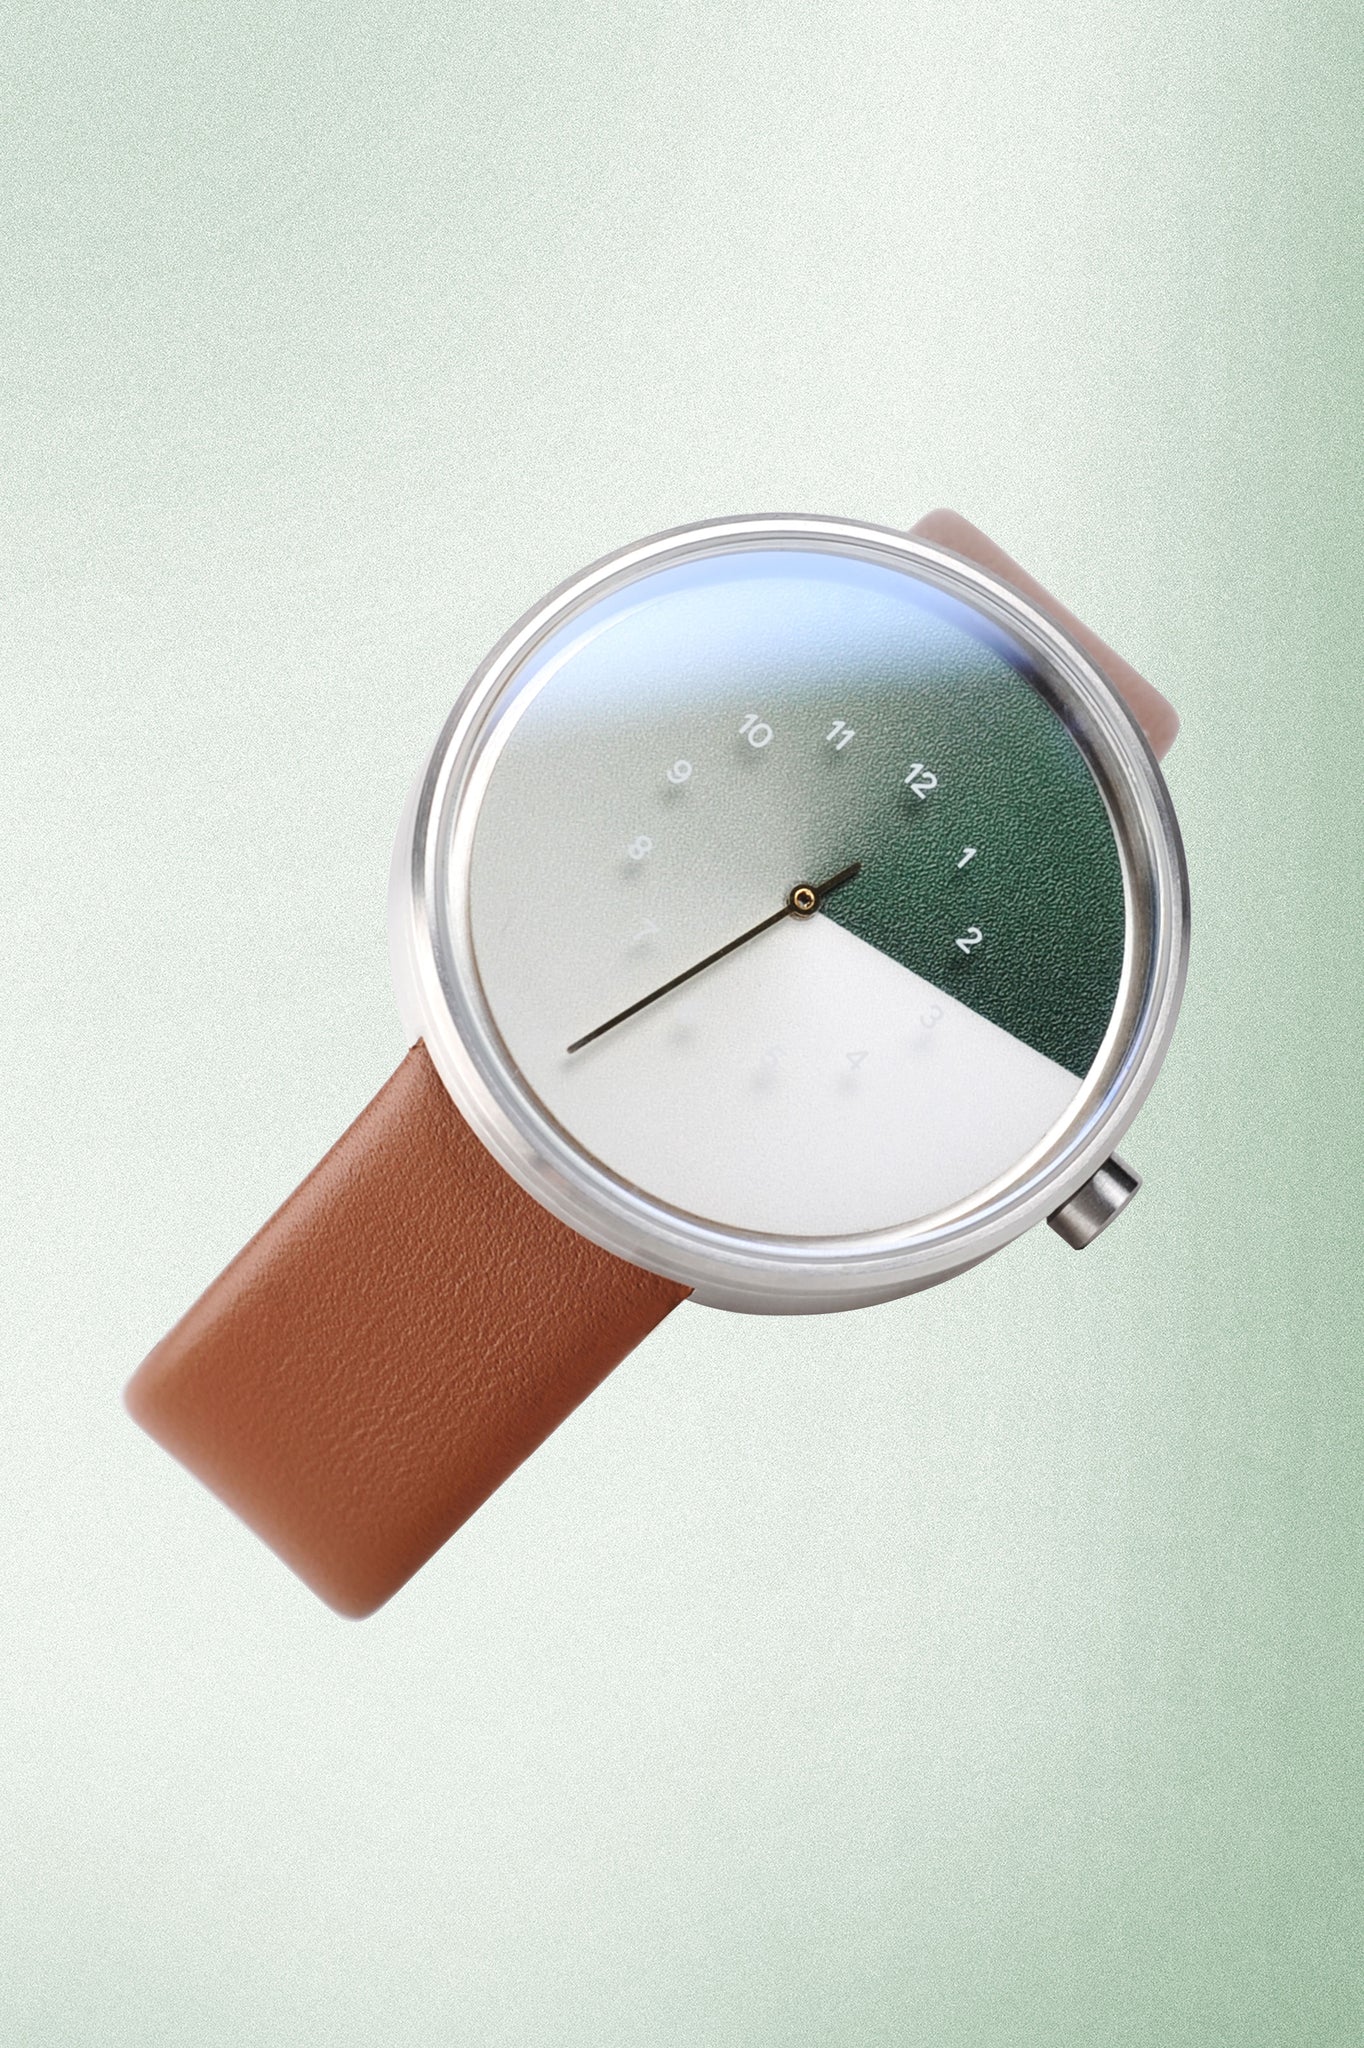 TTT#1 - Seoul - Hidden Time Watch - Olive is a stunning timepiece that features a sleek green watch face set against a light green background, accented by rich brown straps